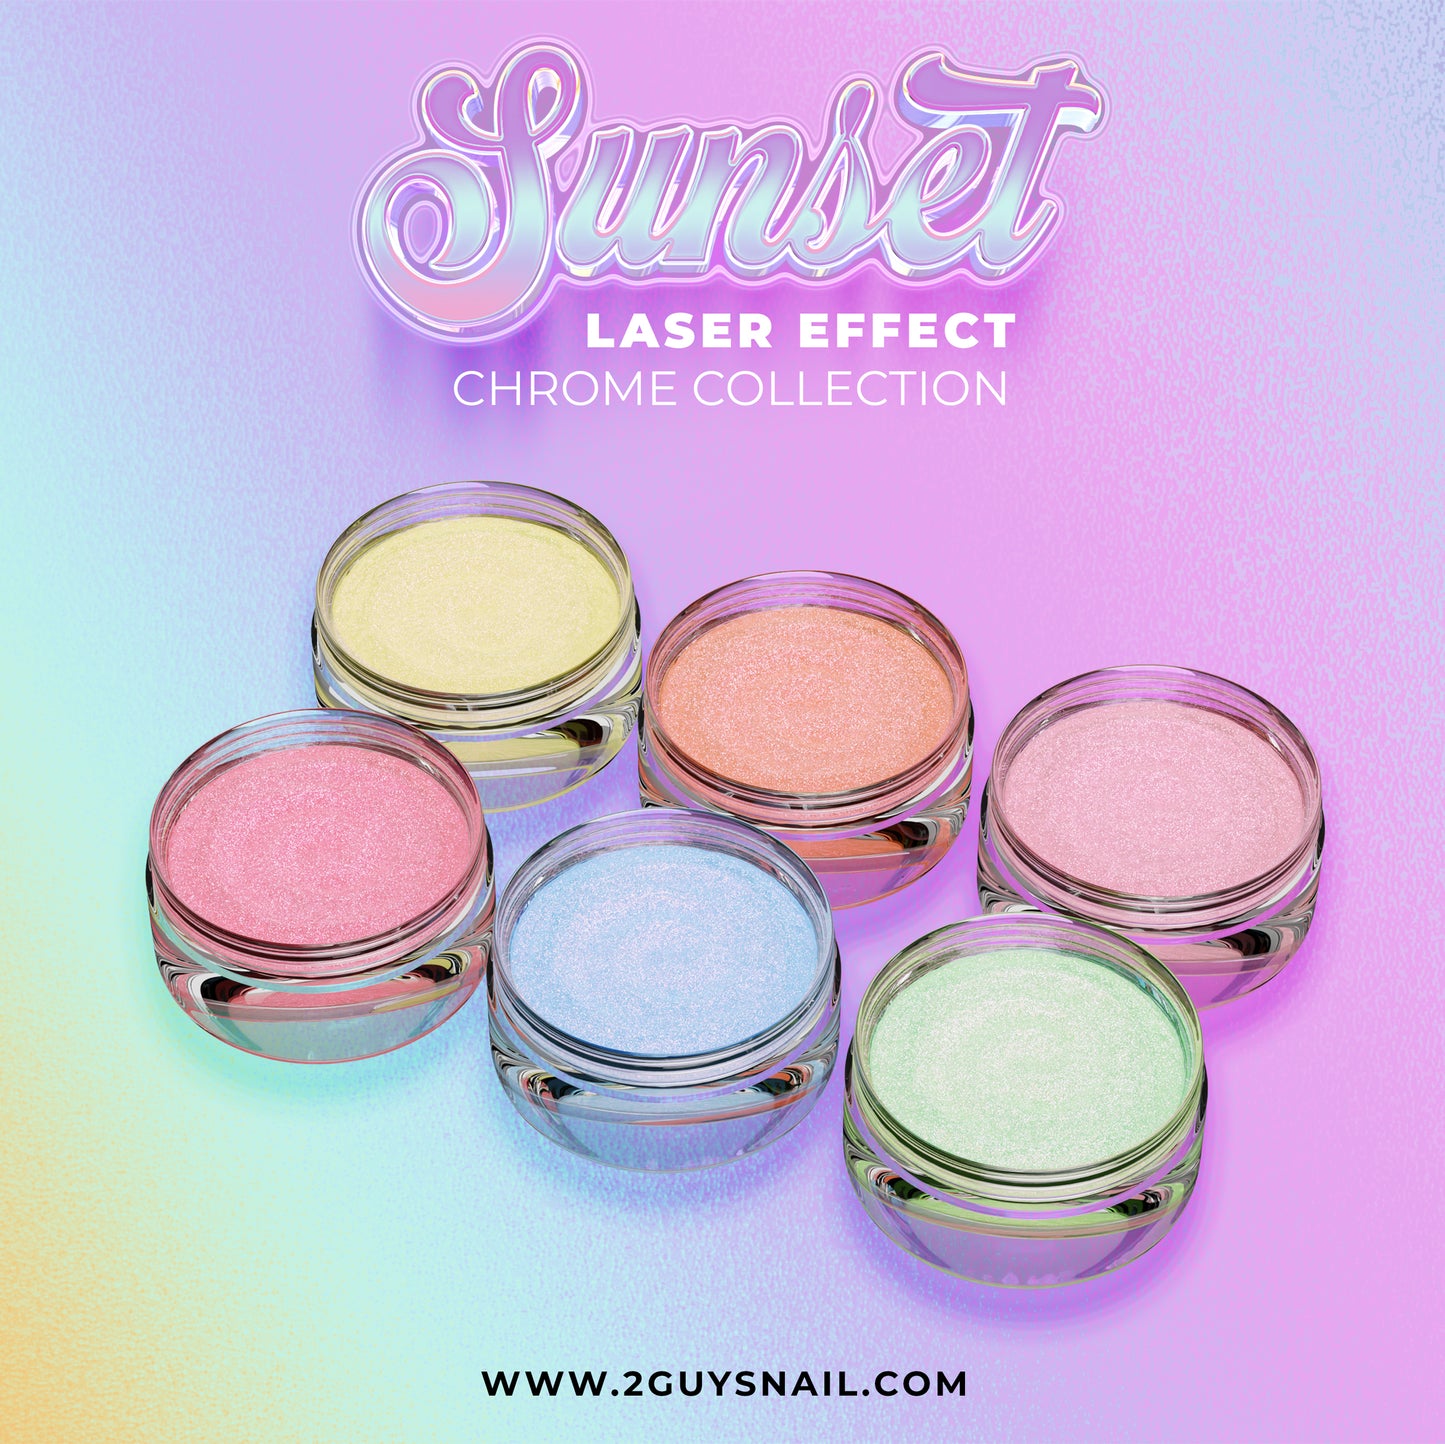 Sunset Chrome Collection (6 colors - 1g/jar)